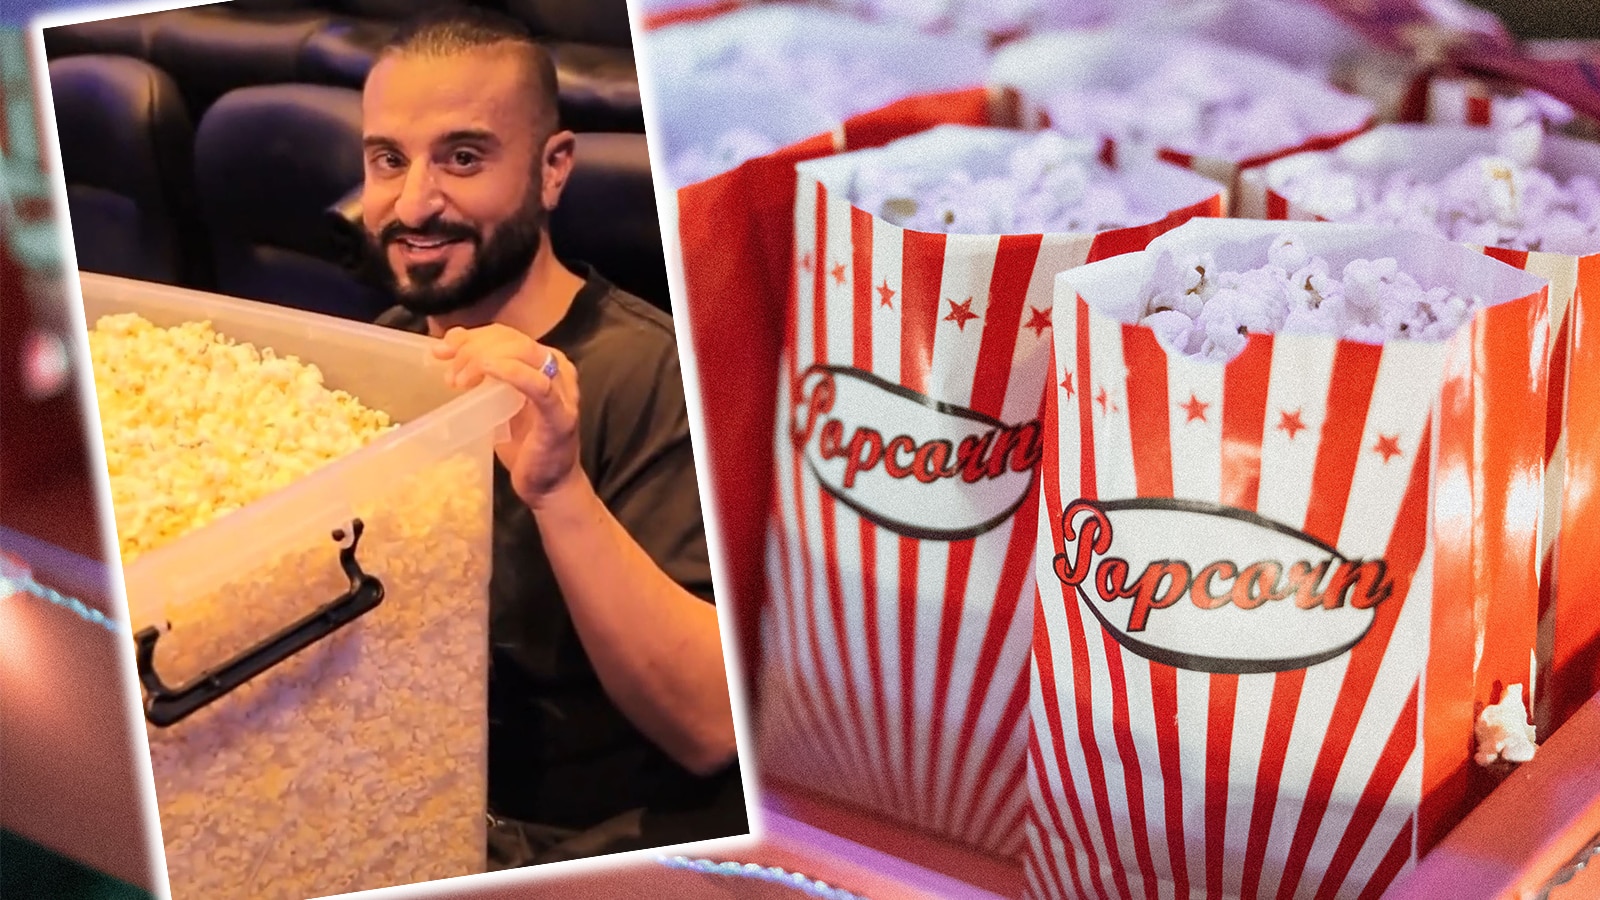 This Viral Video Shows How To Evenly Butter Your Movie Theater Popcorn